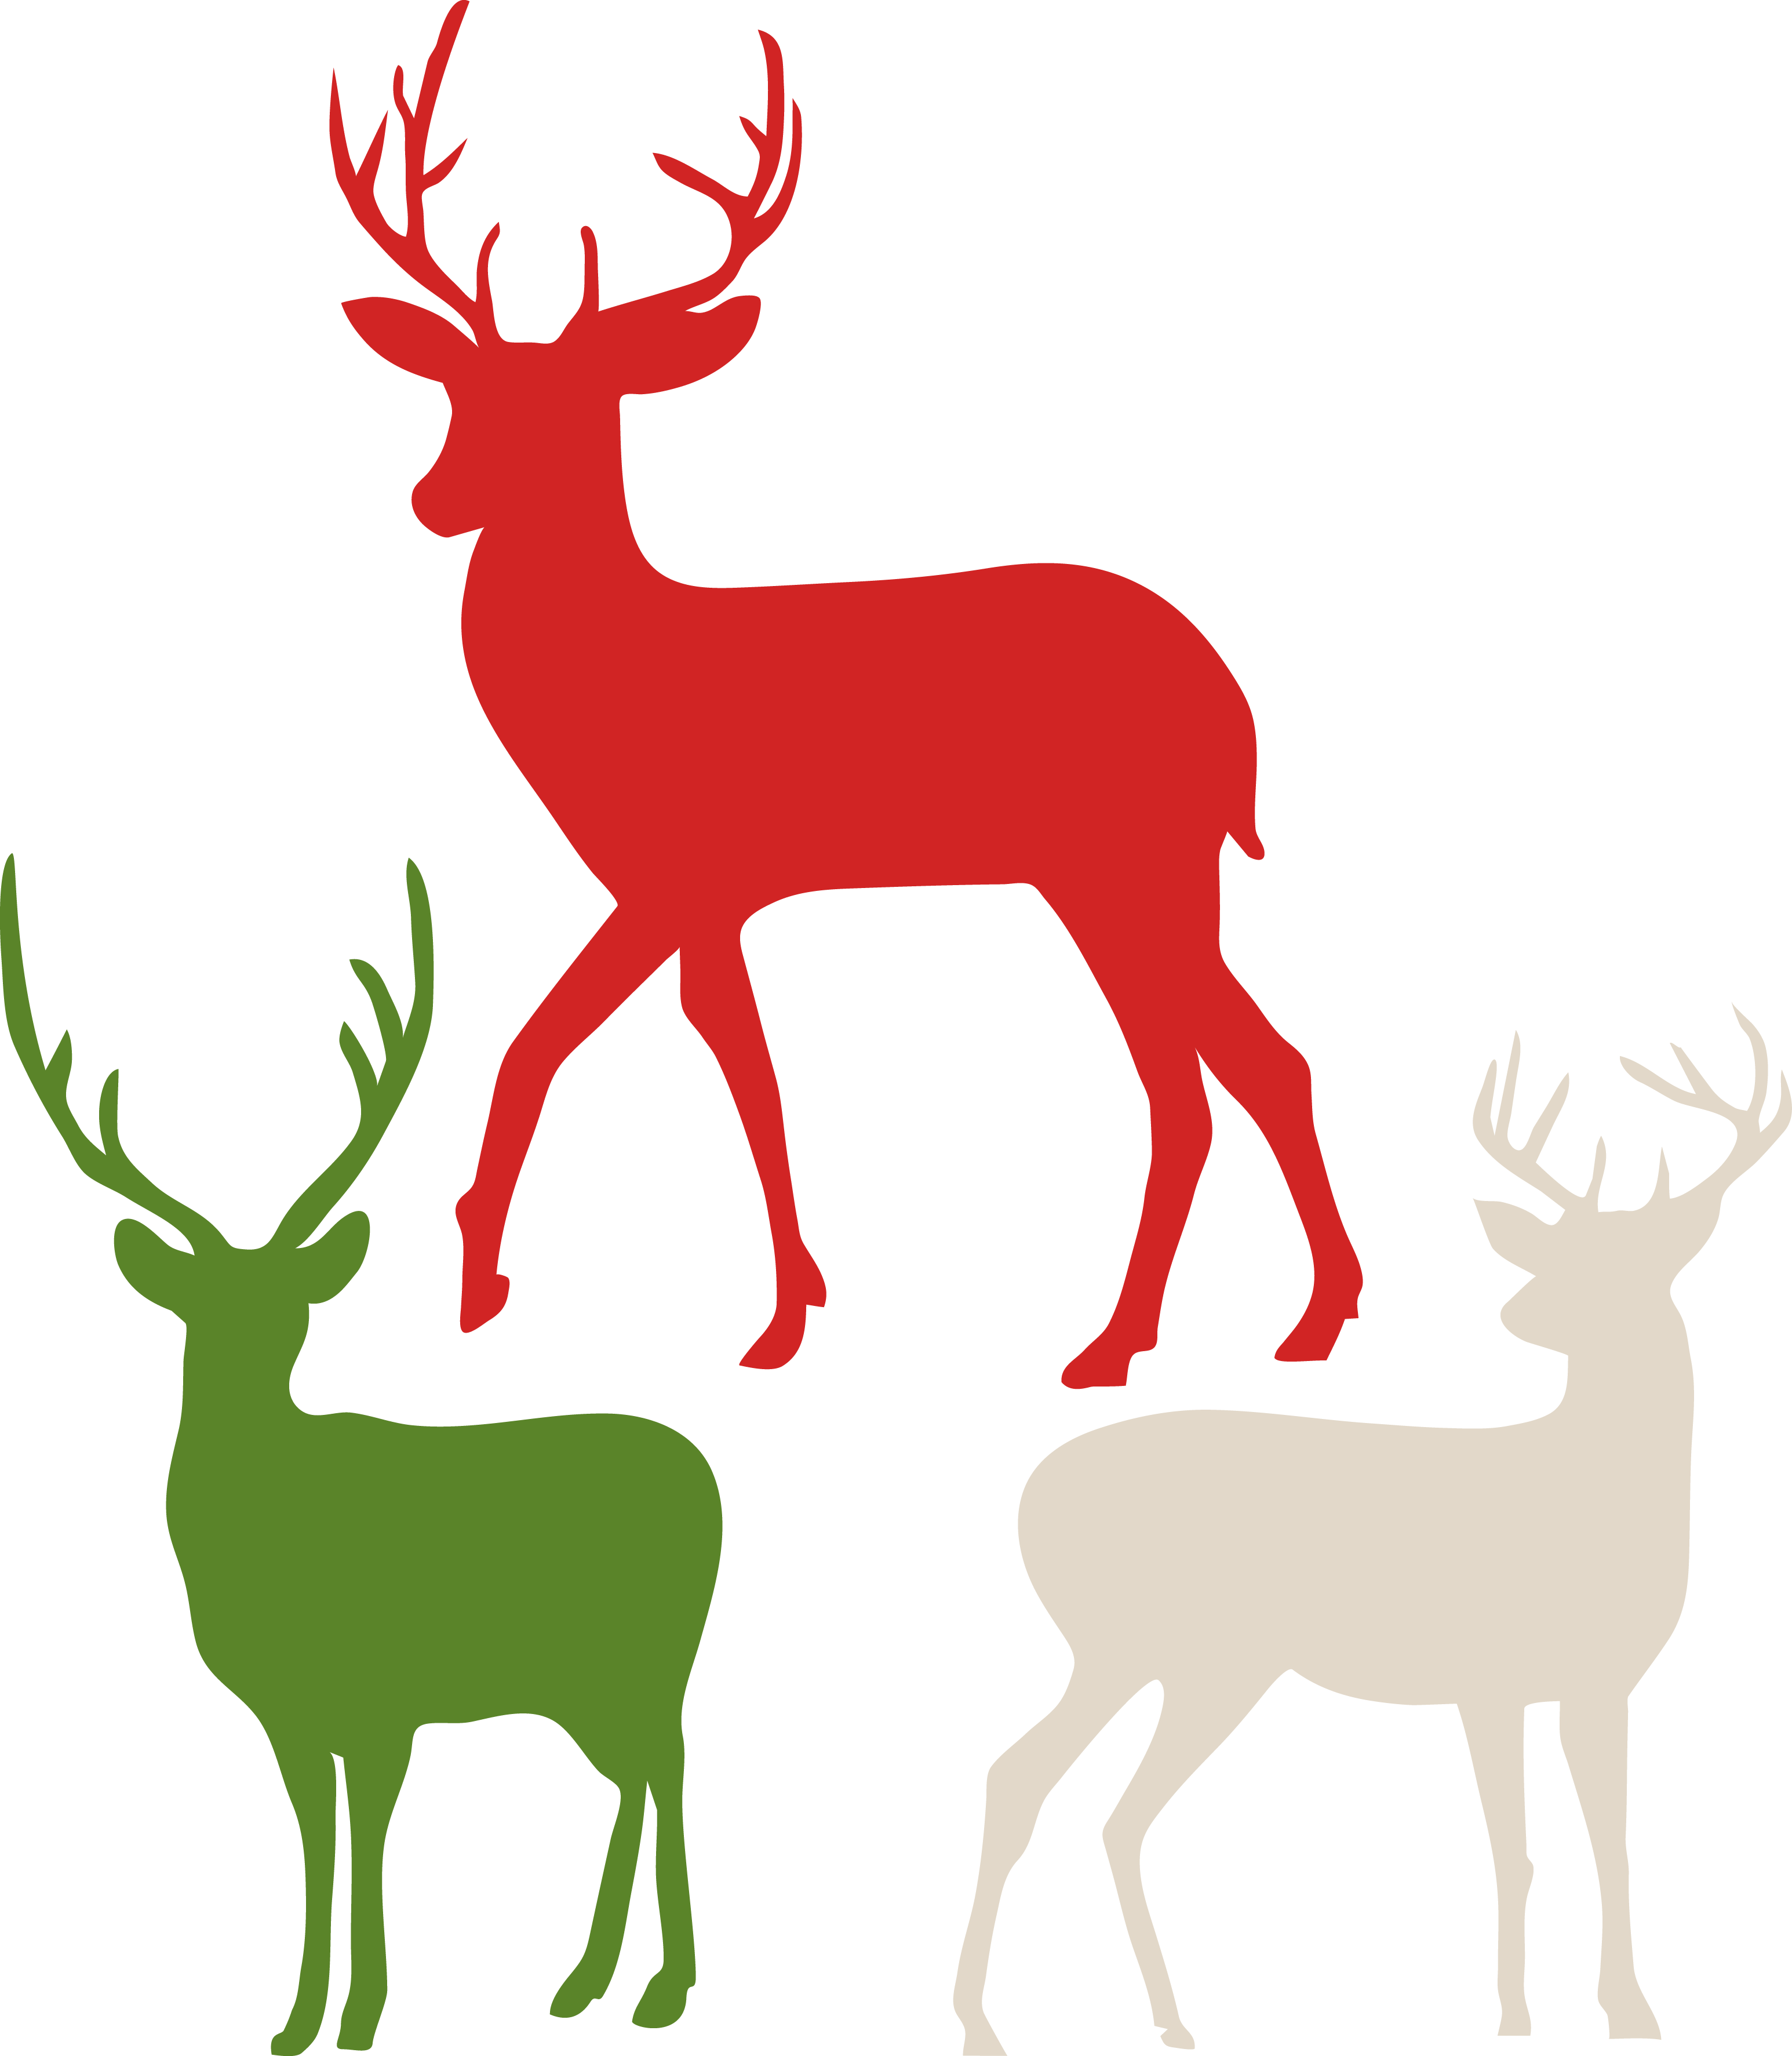 Download Download Reindeer Silhouette Motifs Cricut Ideas Silhouettes Reindeer Svg Free Png Image With No Background Pngkey Com